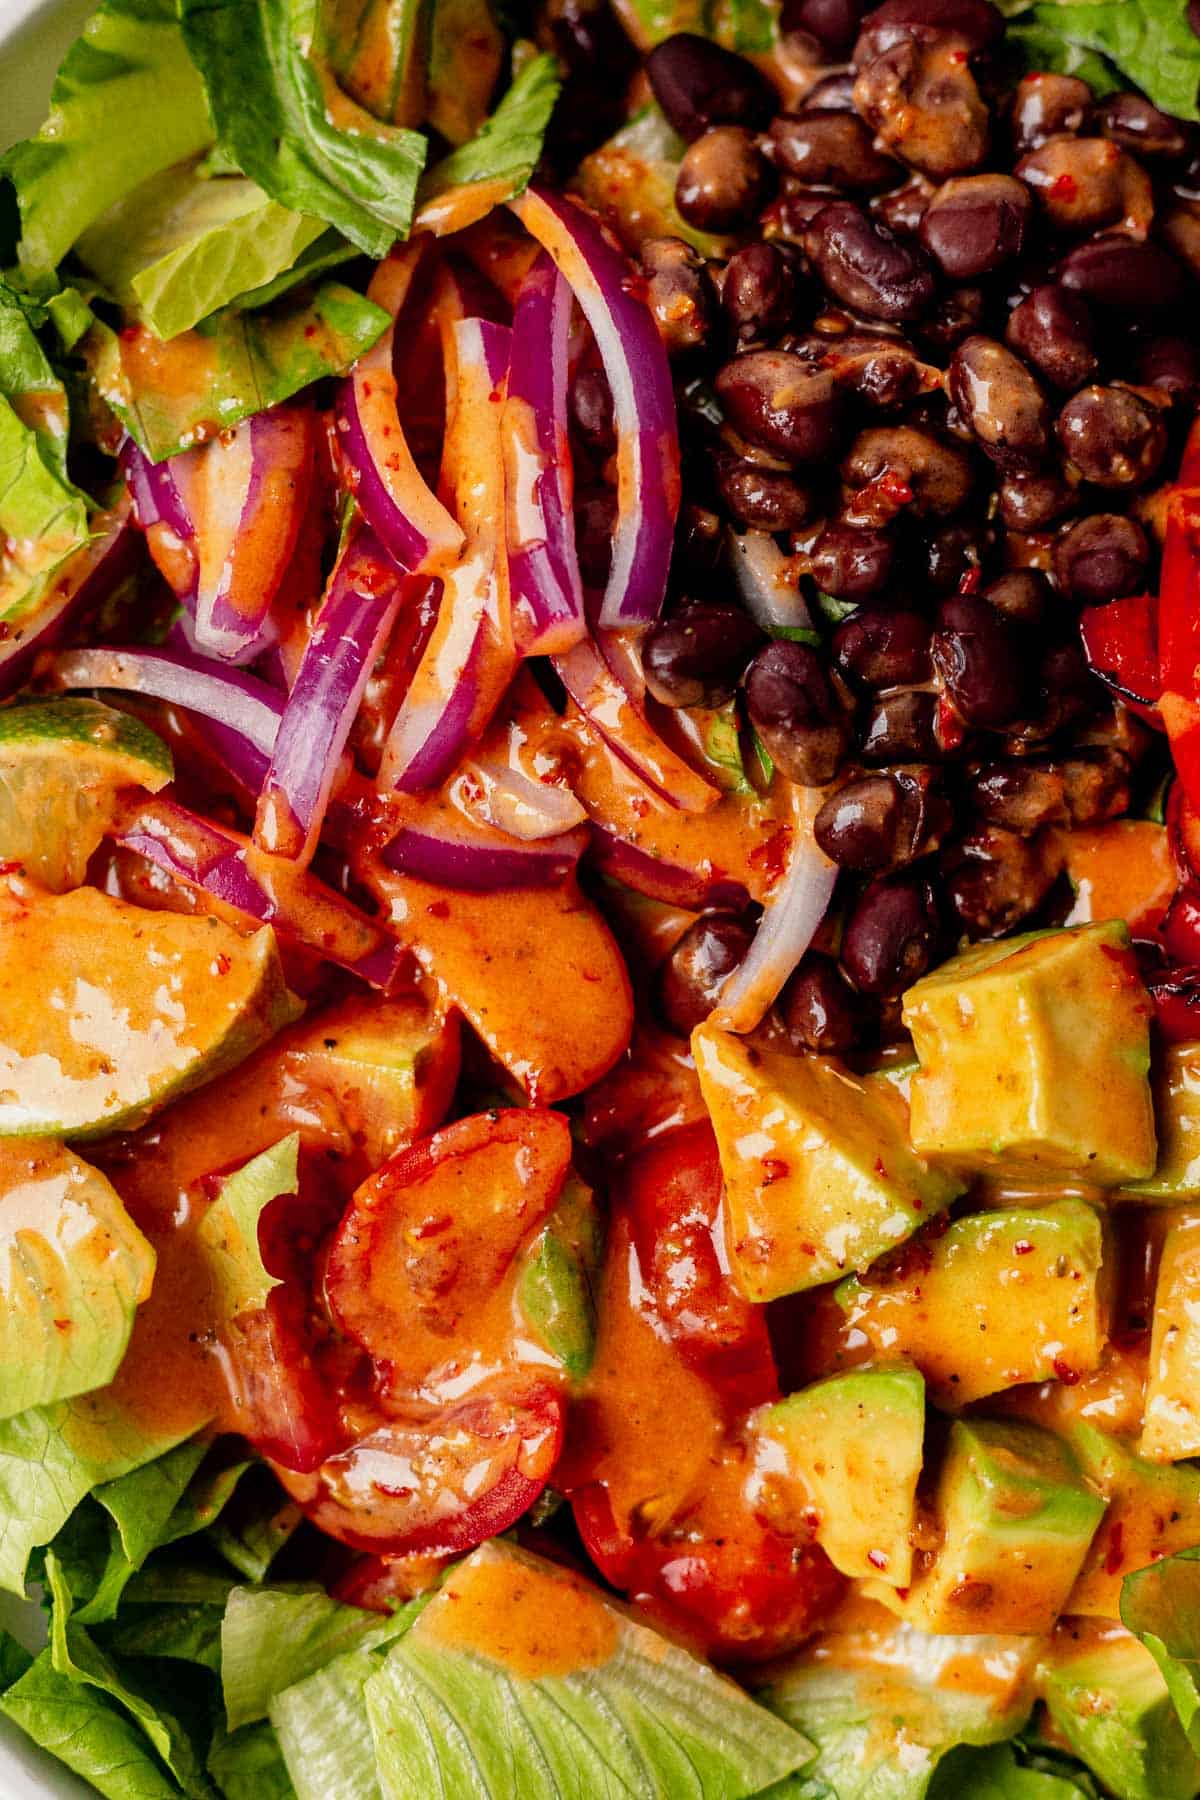 chipotle vinaigrette covering a salad with romaine, black beans, and avocado